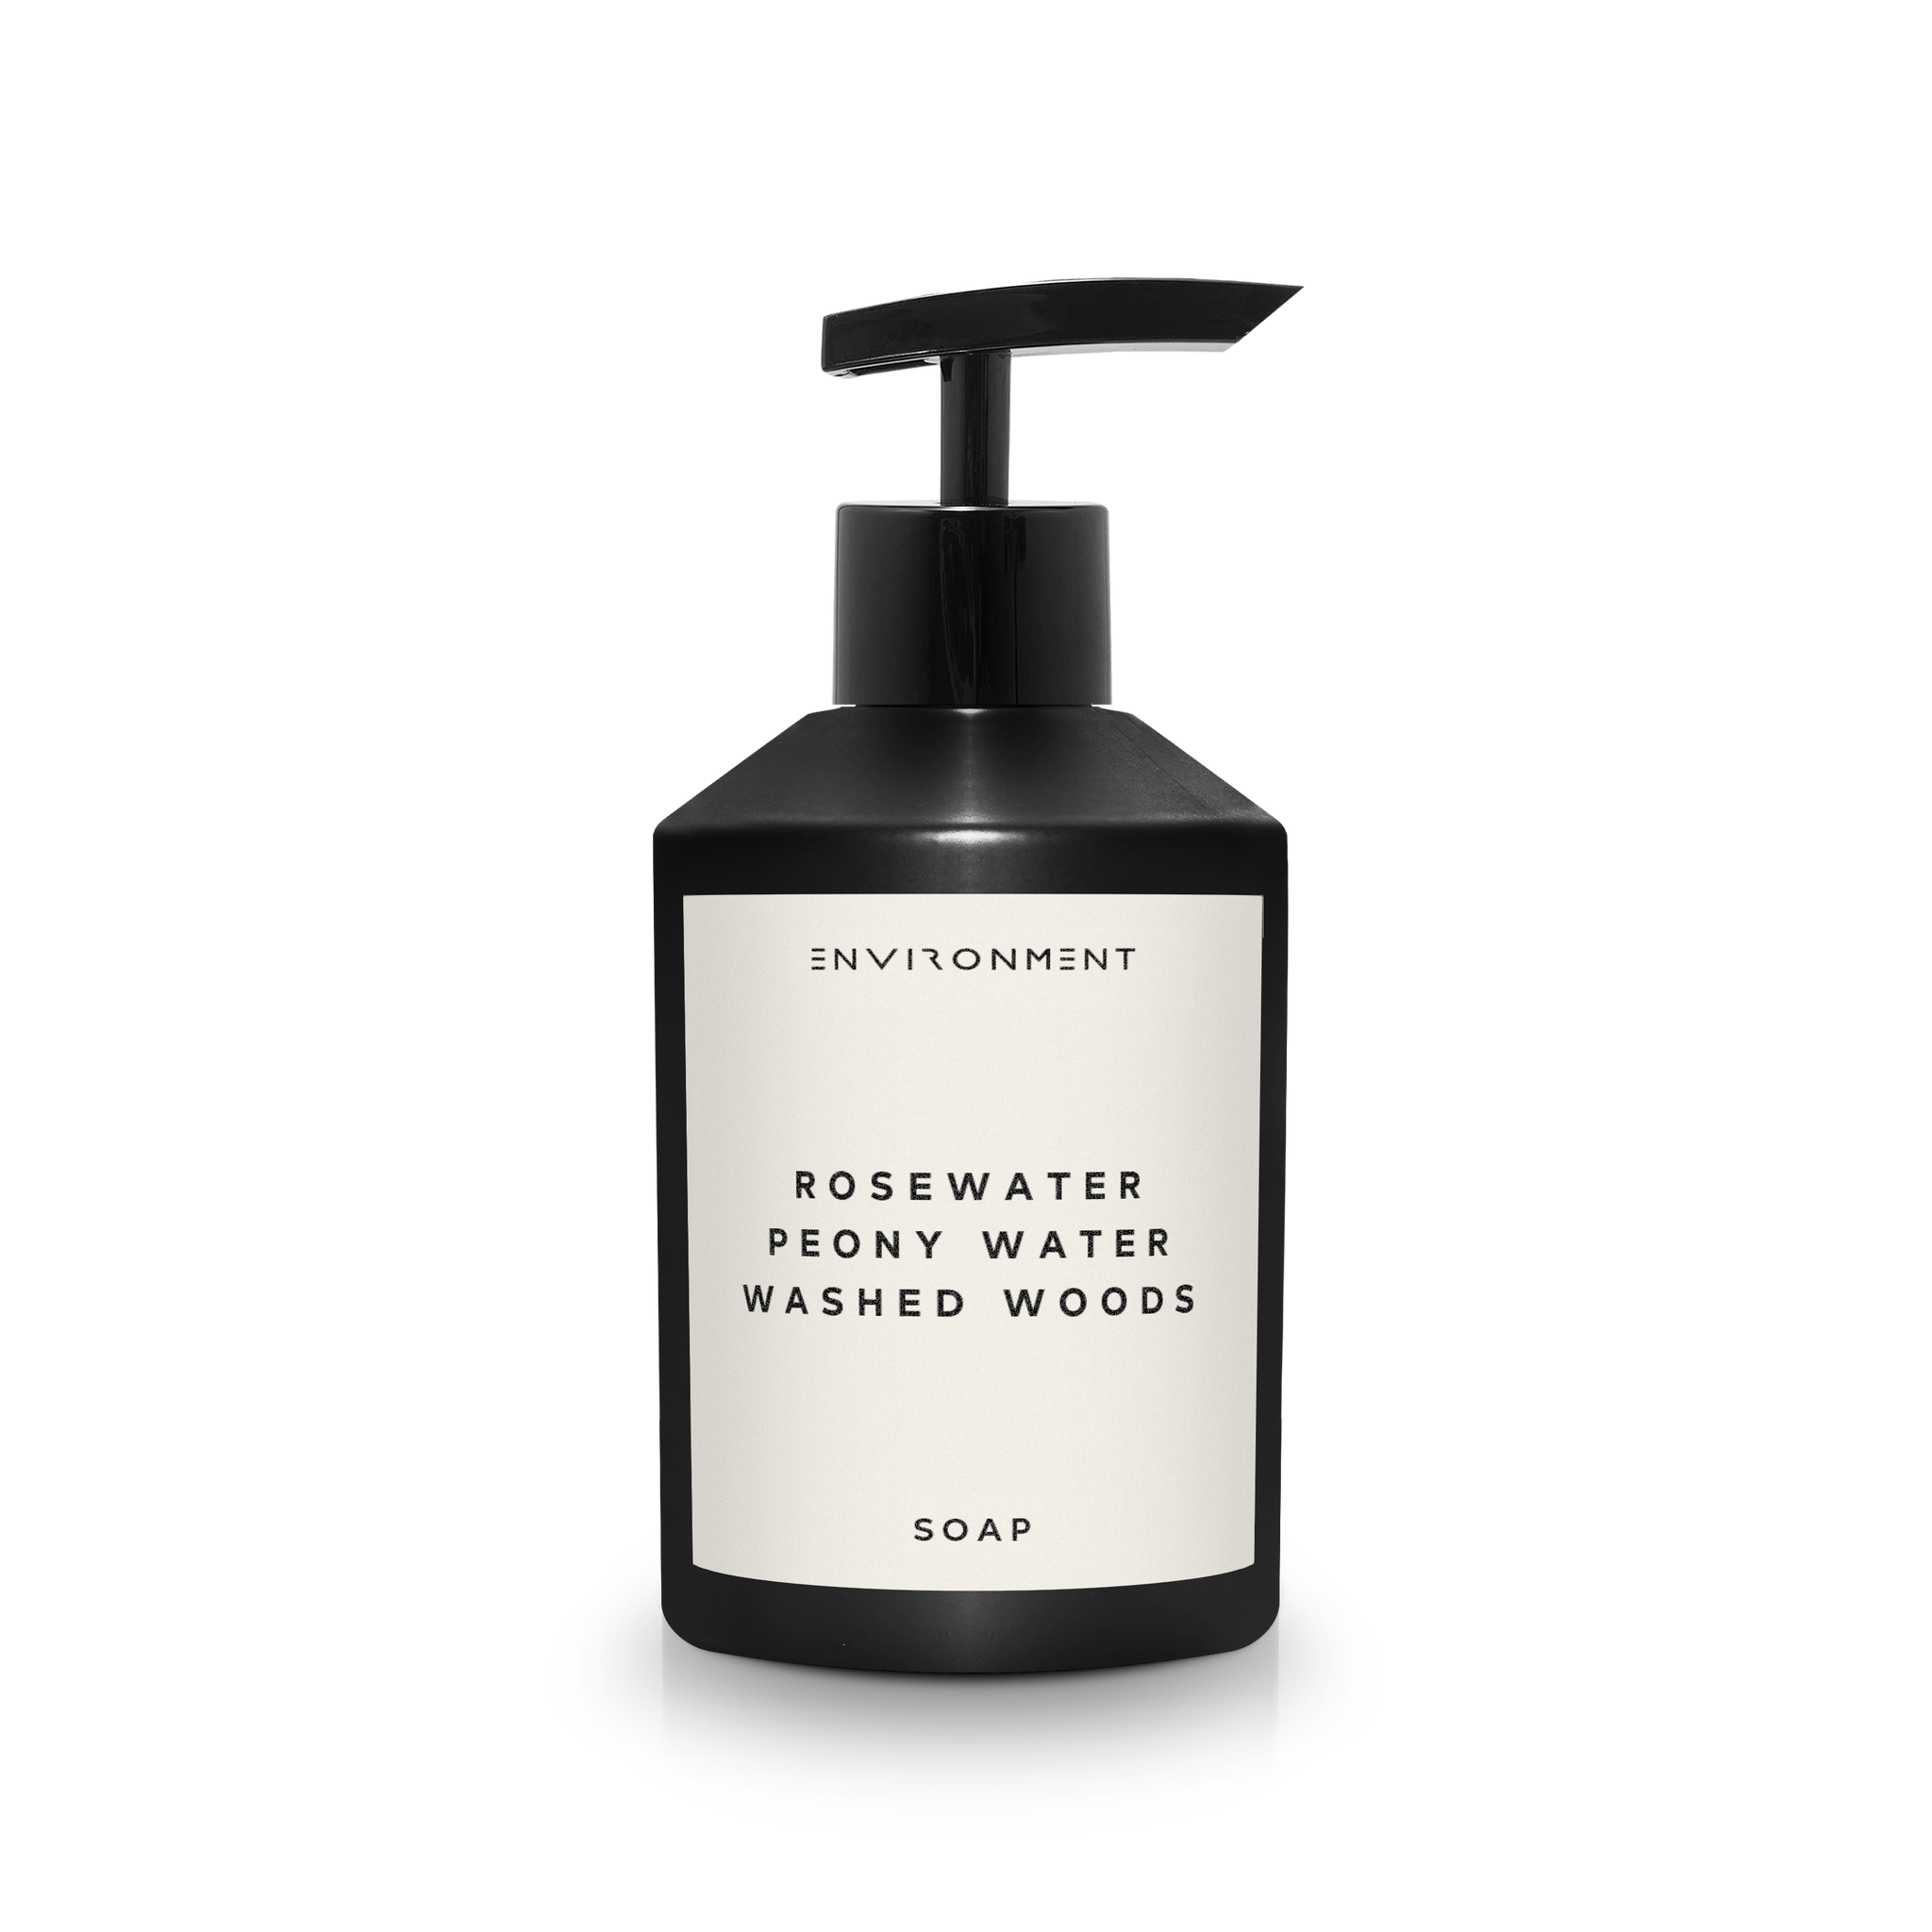 Rosewater | Peony Water | Washed Woods Hand Soap (Inspired by Issey Miyake L'Eau d'Issey®)